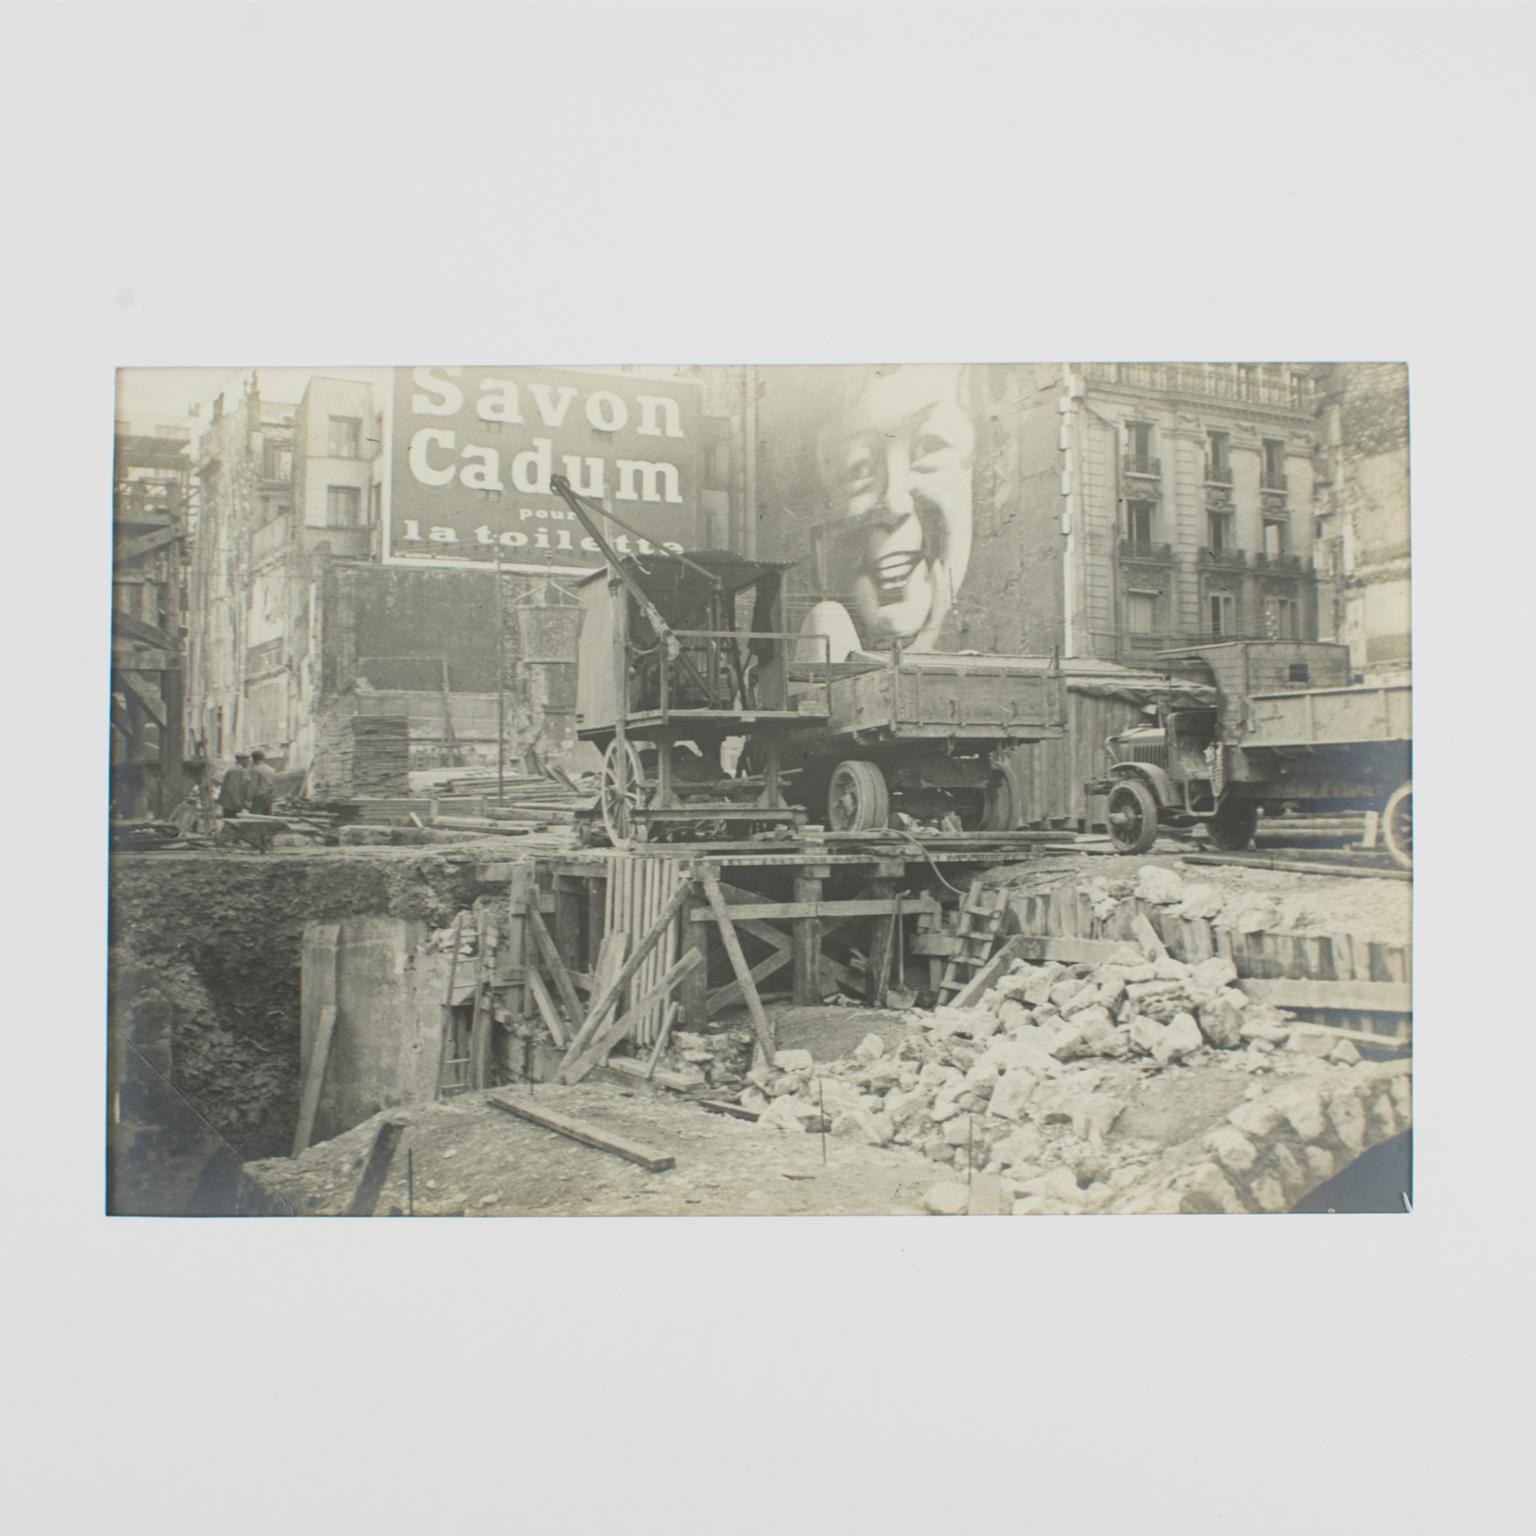 A unique original silver gelatin black and white photography. A construction site on The Boulevard Haussmann in Paris, France, June 19, 1926. 
A view of the Boulevard Haussmann in Paris with a deep excavation construction site. In the background is